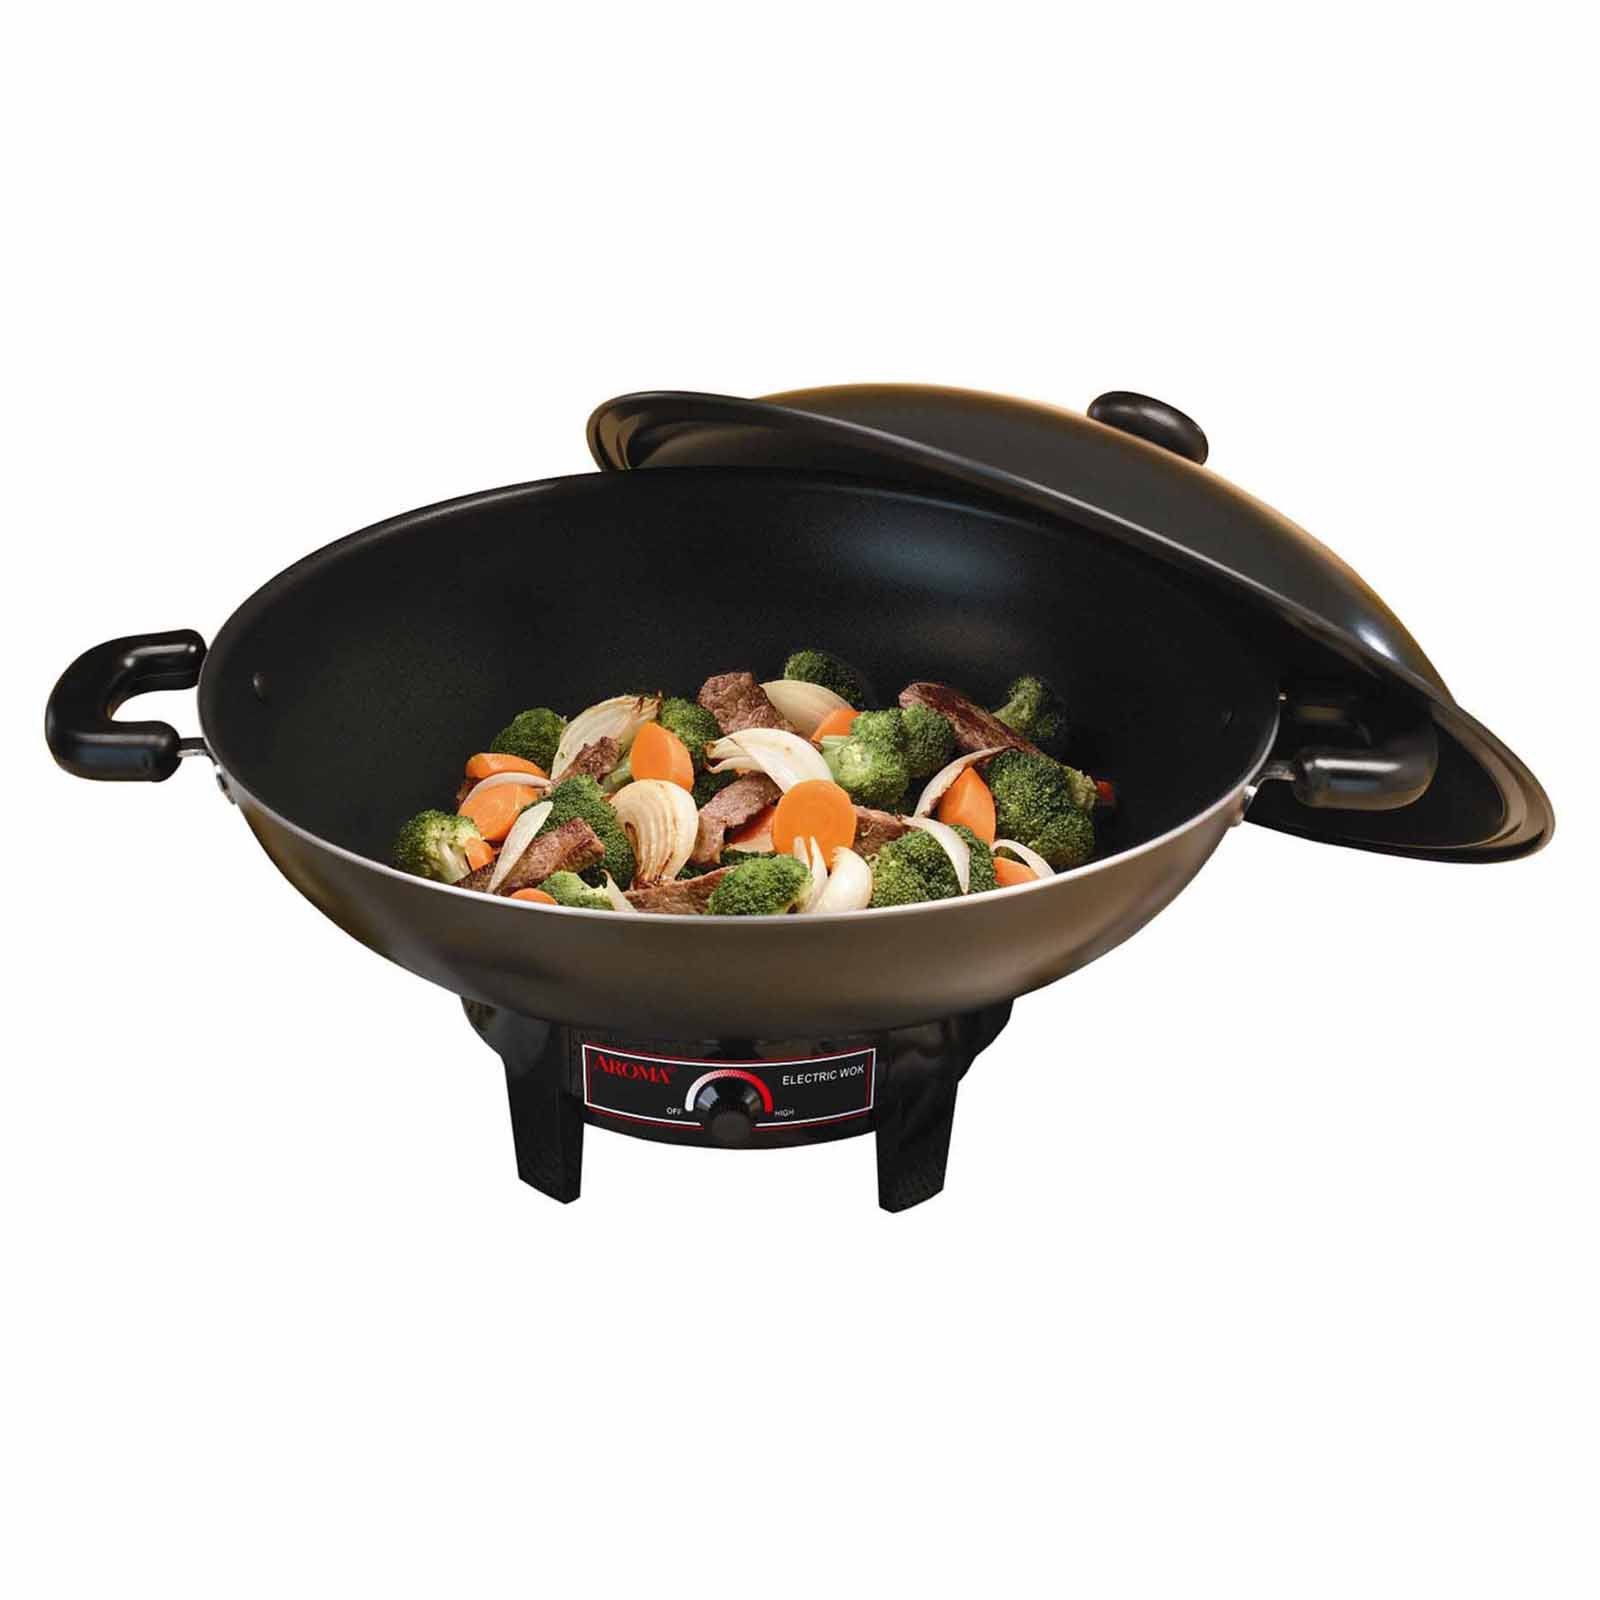 Household Multi-Function Electric Skillet Camping Cookware with Glass Cover Electric Frying pan 5L Large Capacity Electric Non-Stick pan 